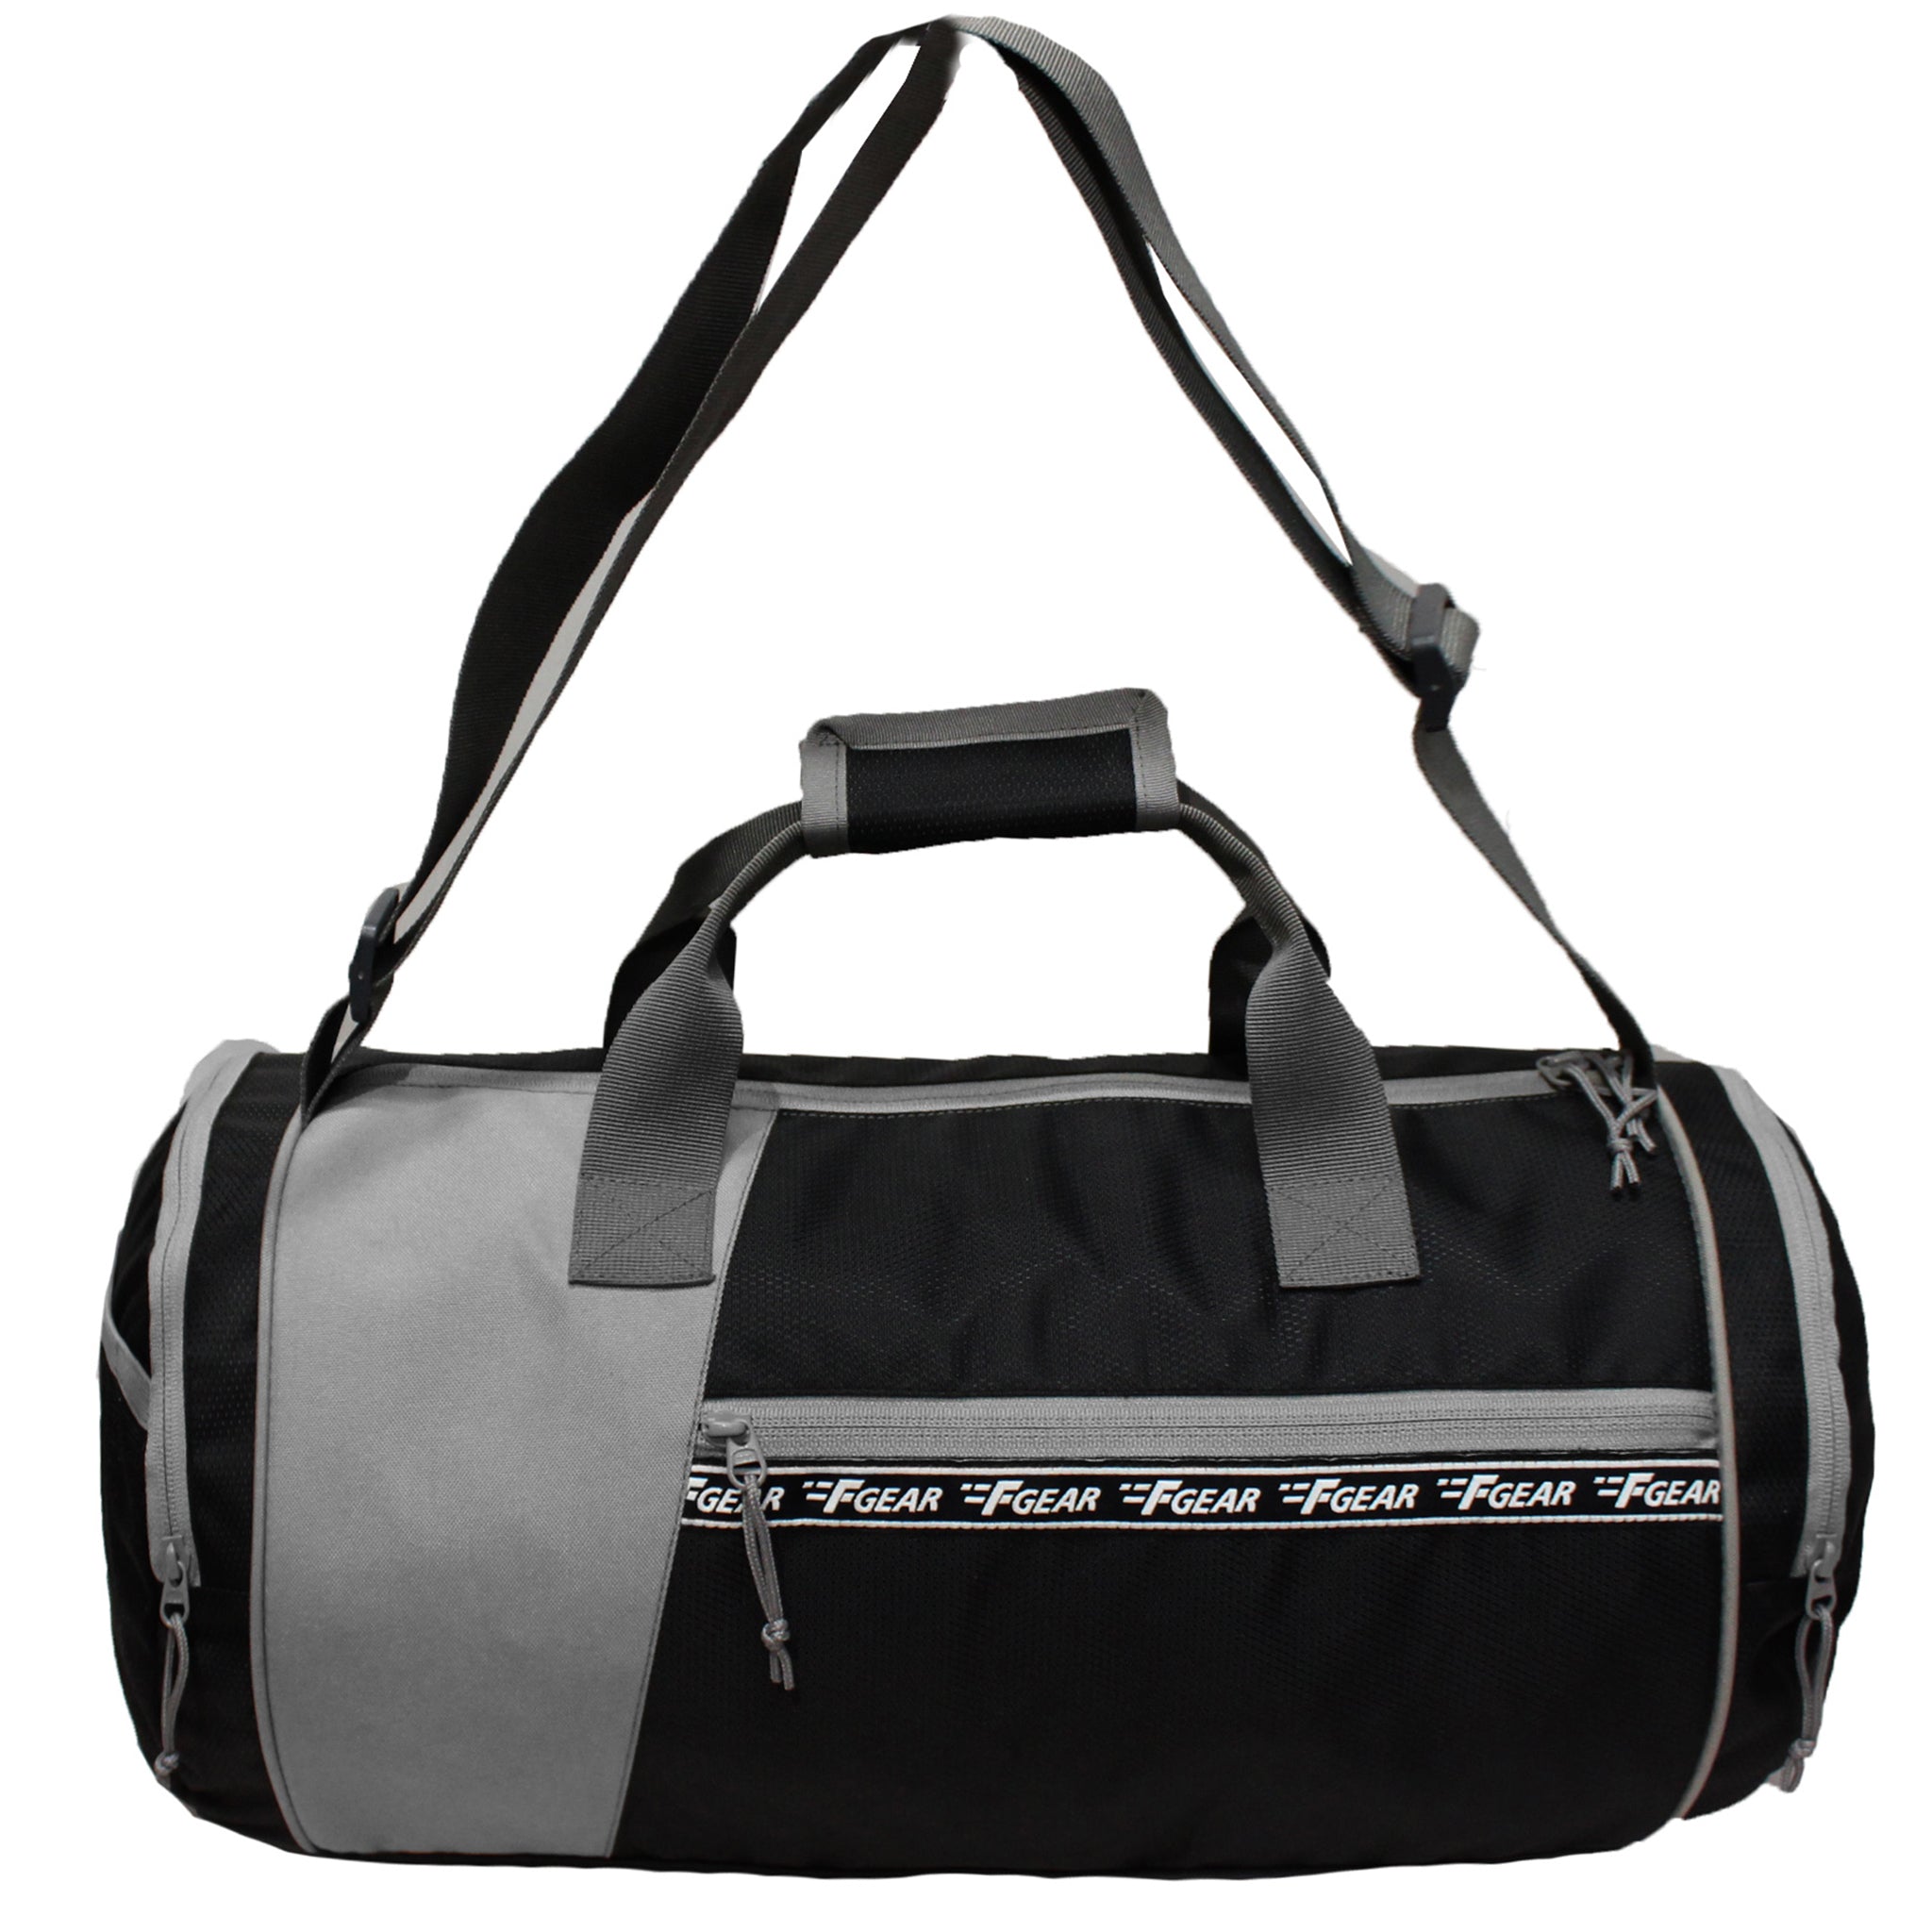 FocusGear Ultimate Gym Bag 2.0: The Durable Crowdsource India | Ubuy